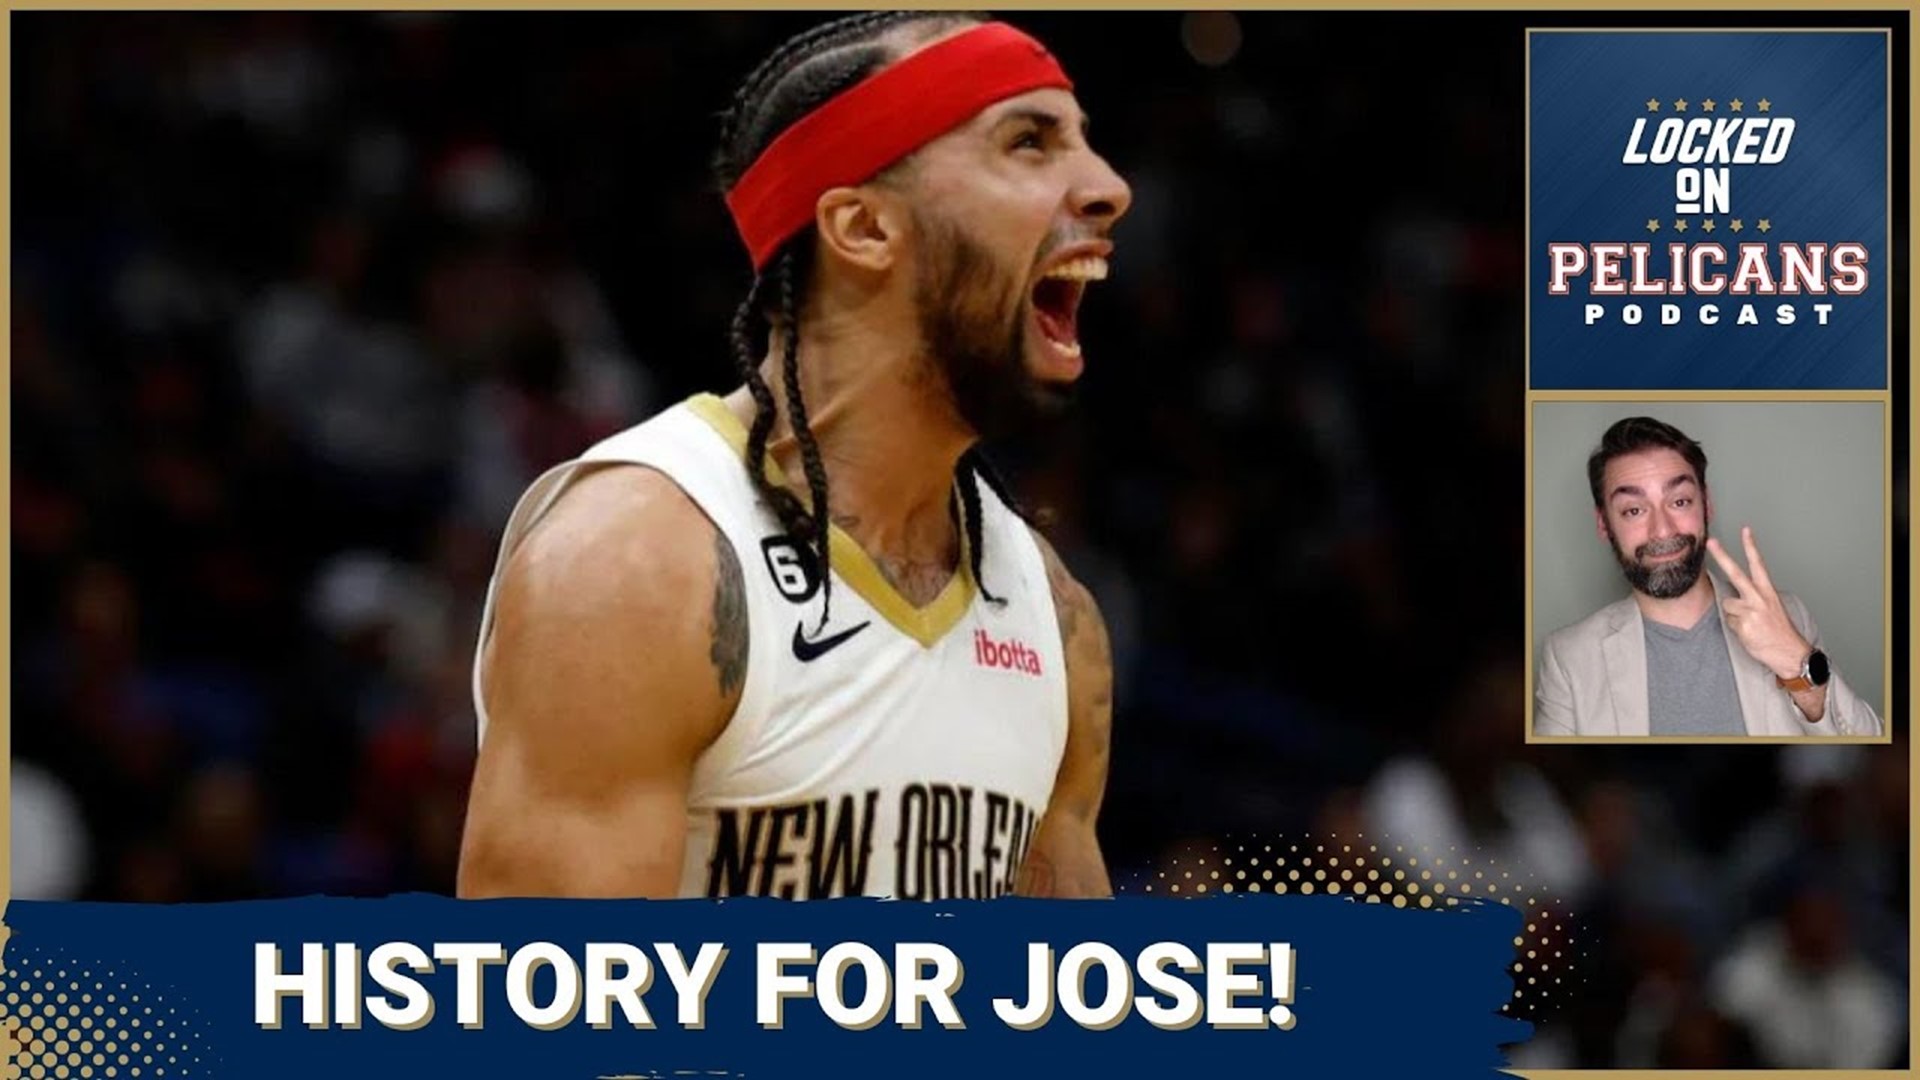 Jose Alvarado had a historic night for the New Orleans Pelicans as he scored 38 points in the win over Nikola Jokic and the Denver Nuggets.